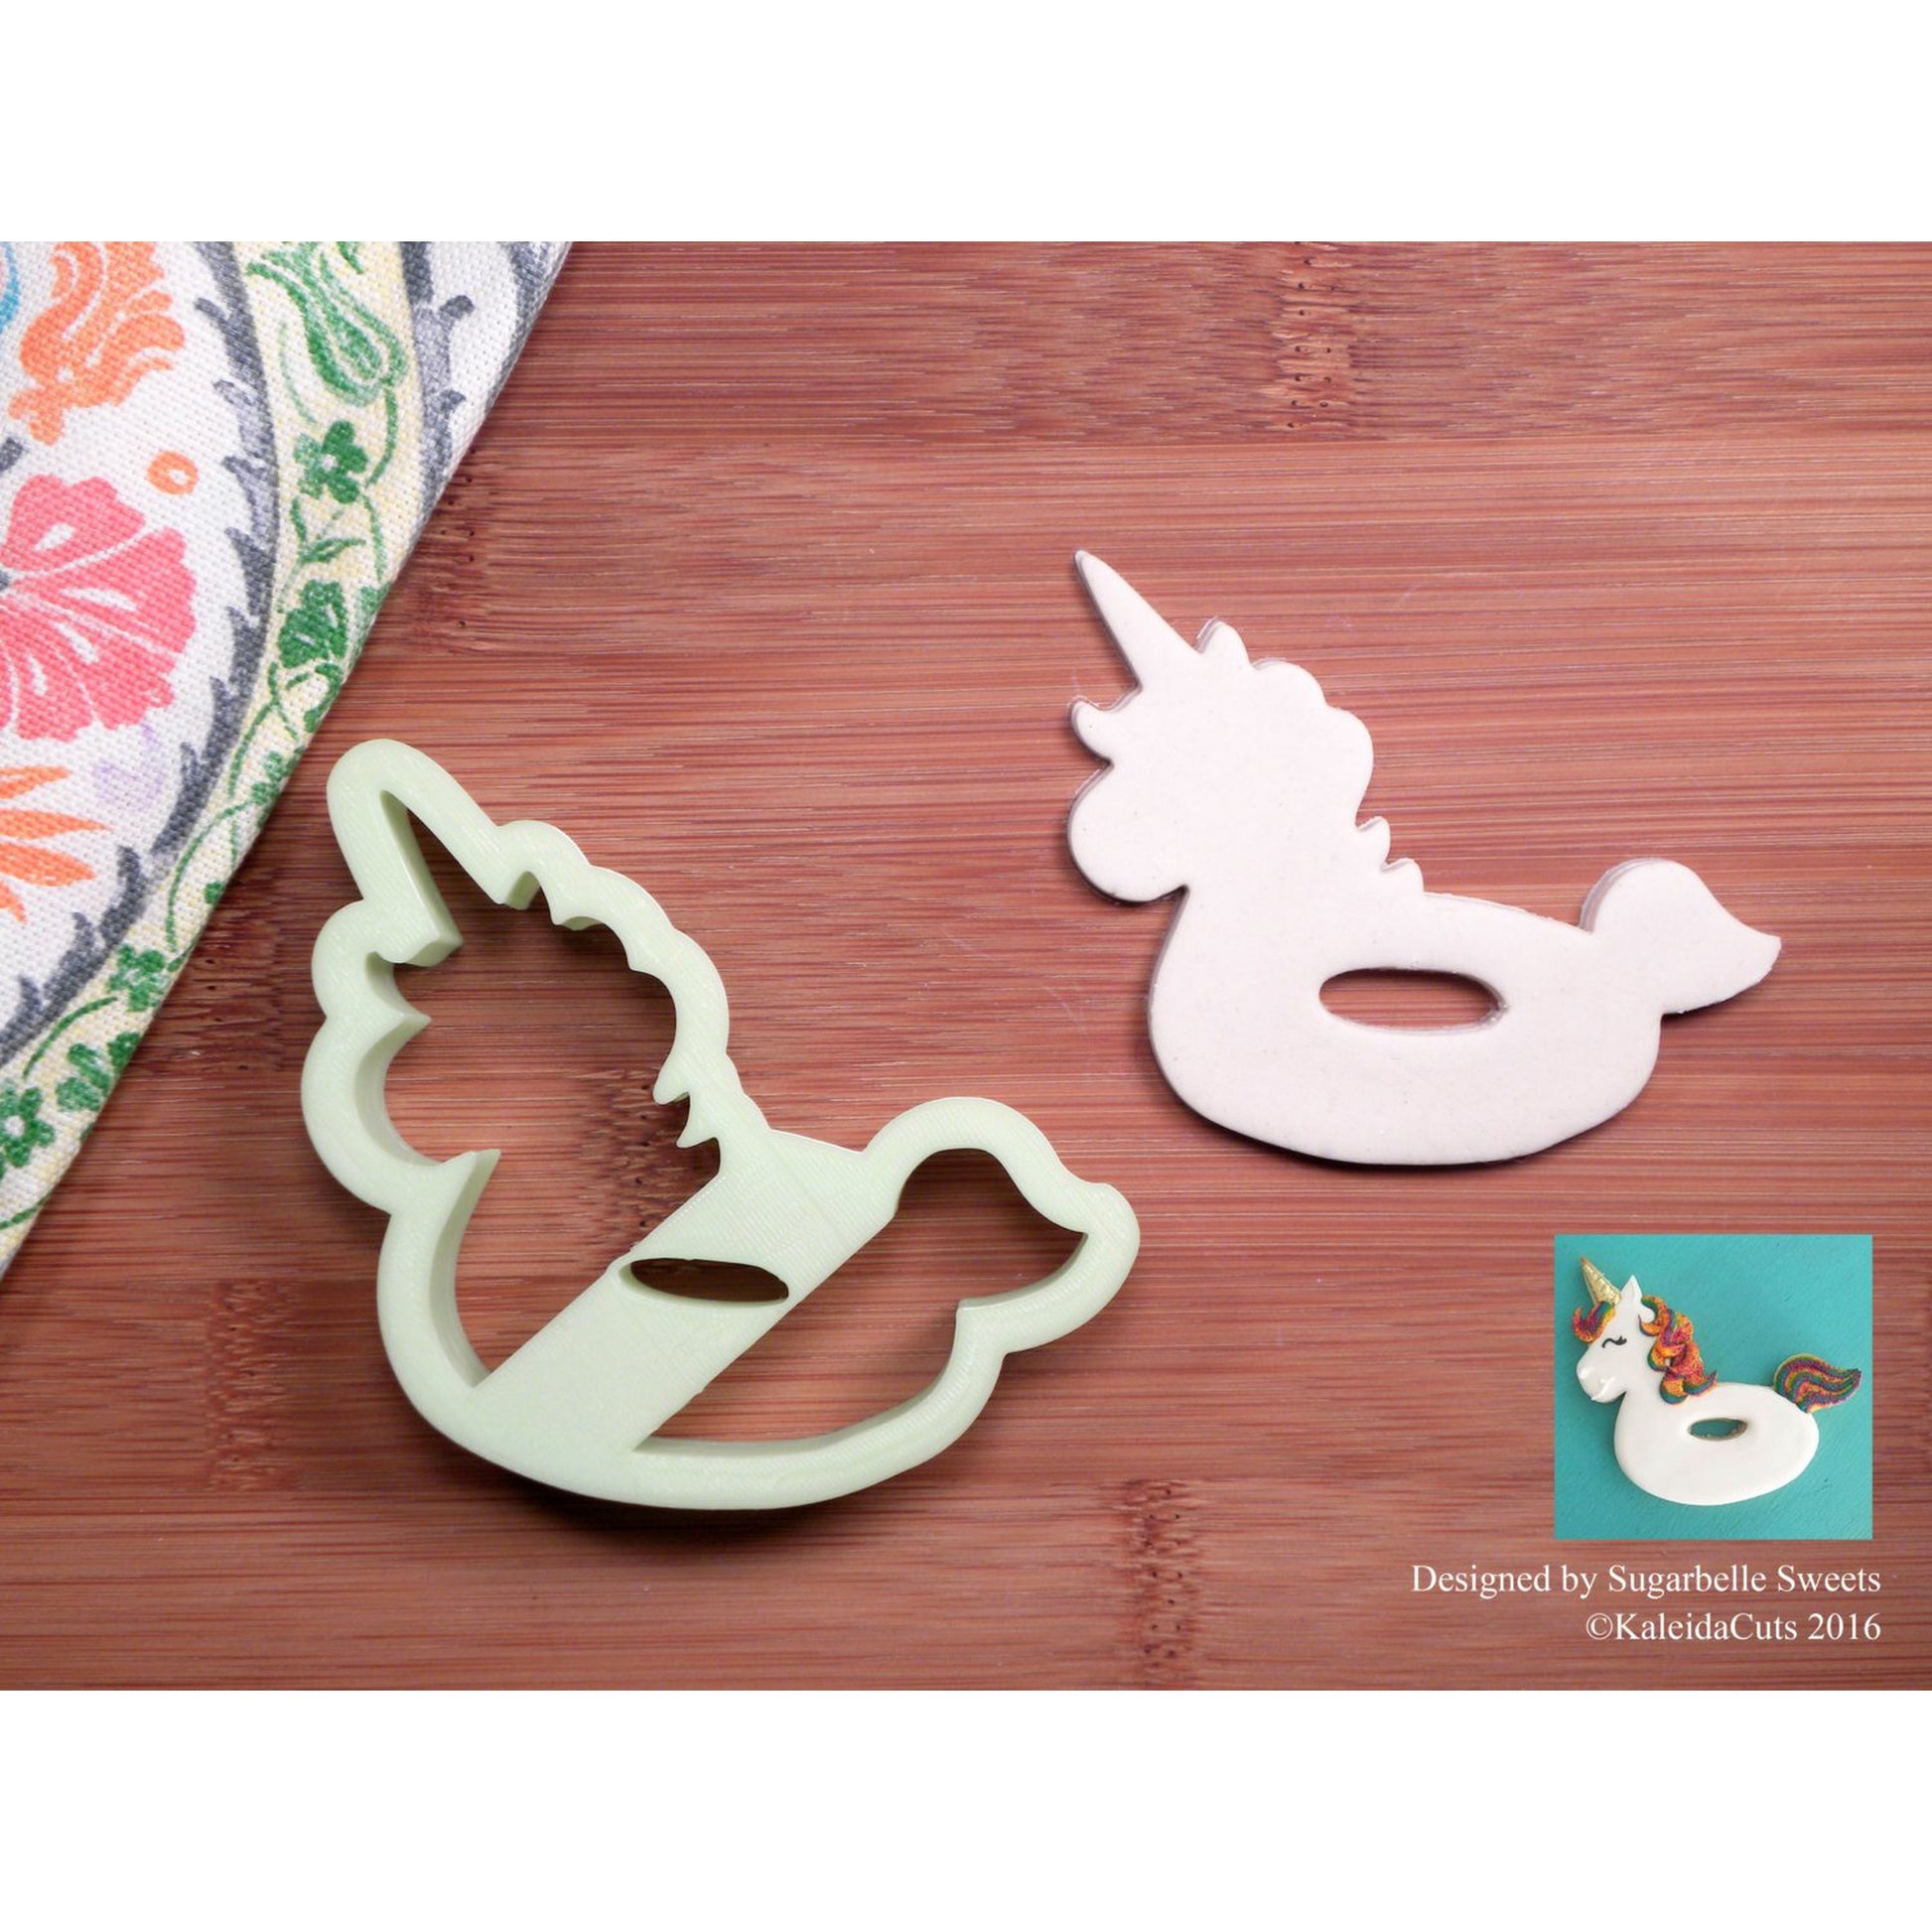 Sugarbelle Sweets Unicorn Pool Float Cookie Cutter